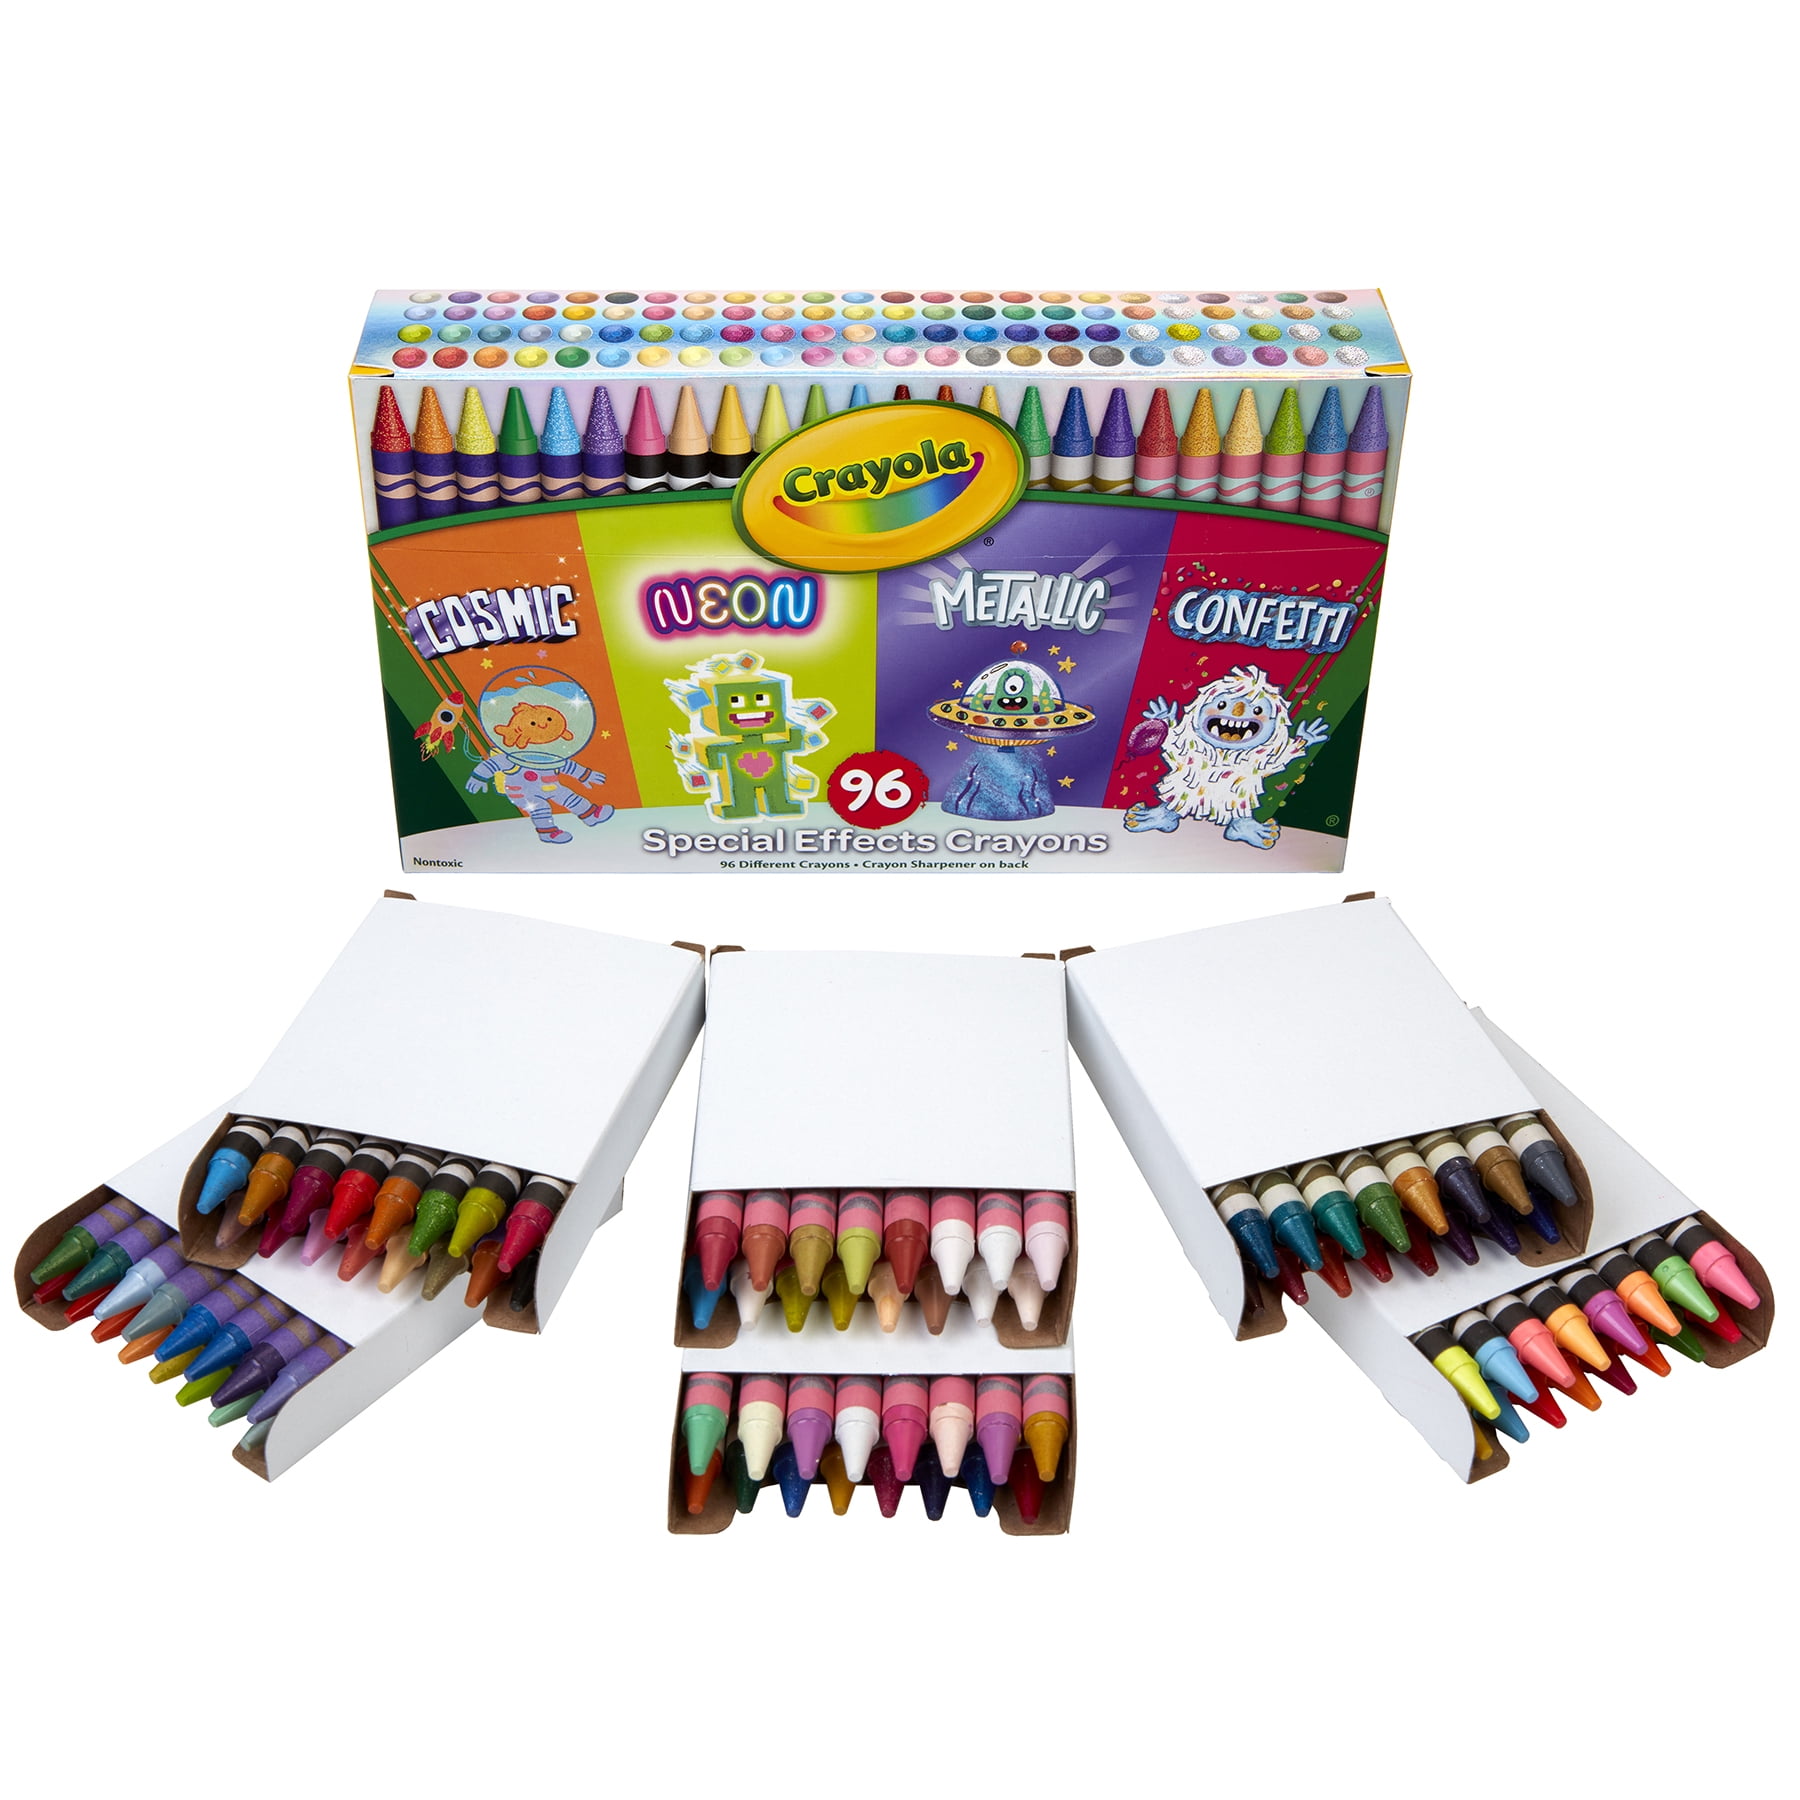 Crayola Special Effects Crayons, (96 Count) 